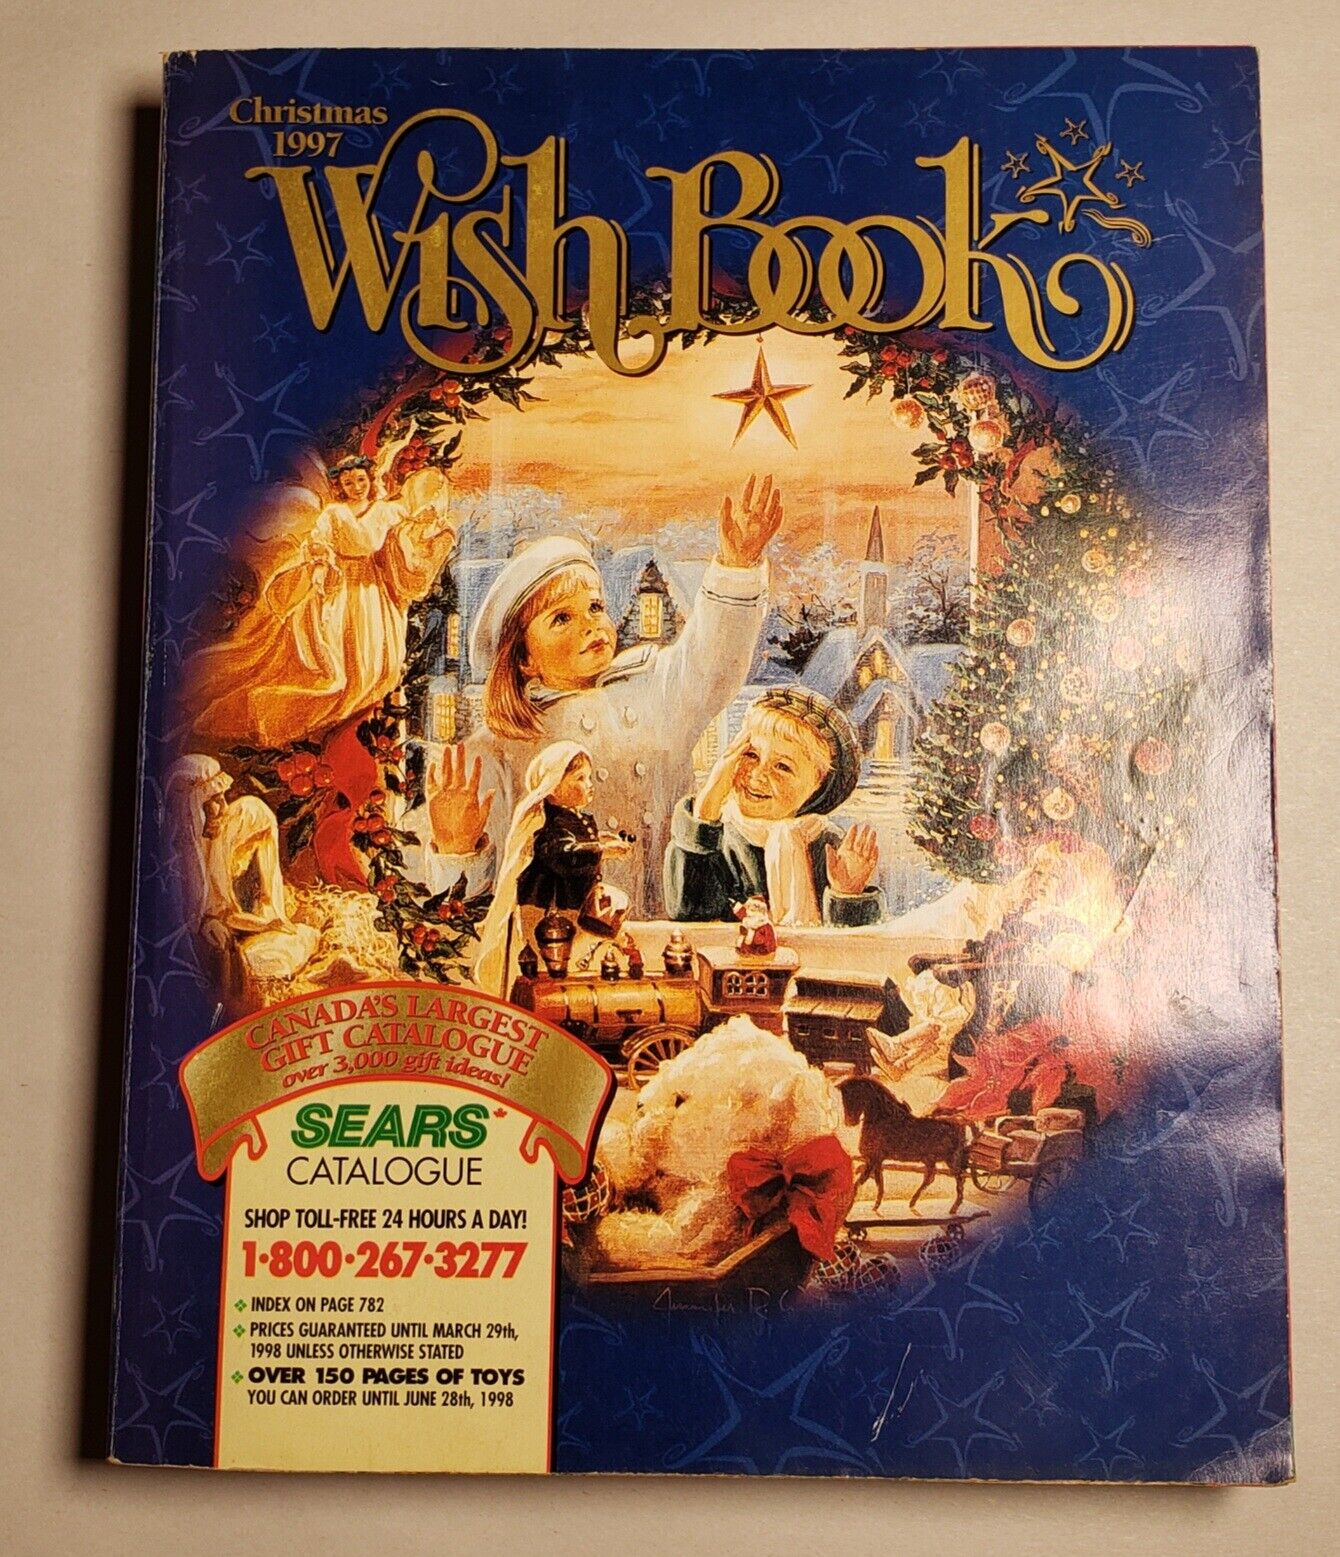 Sears 1997 Christmas Wish Book Catalogue Star Wars Ghostbusters Jurassic CAT1